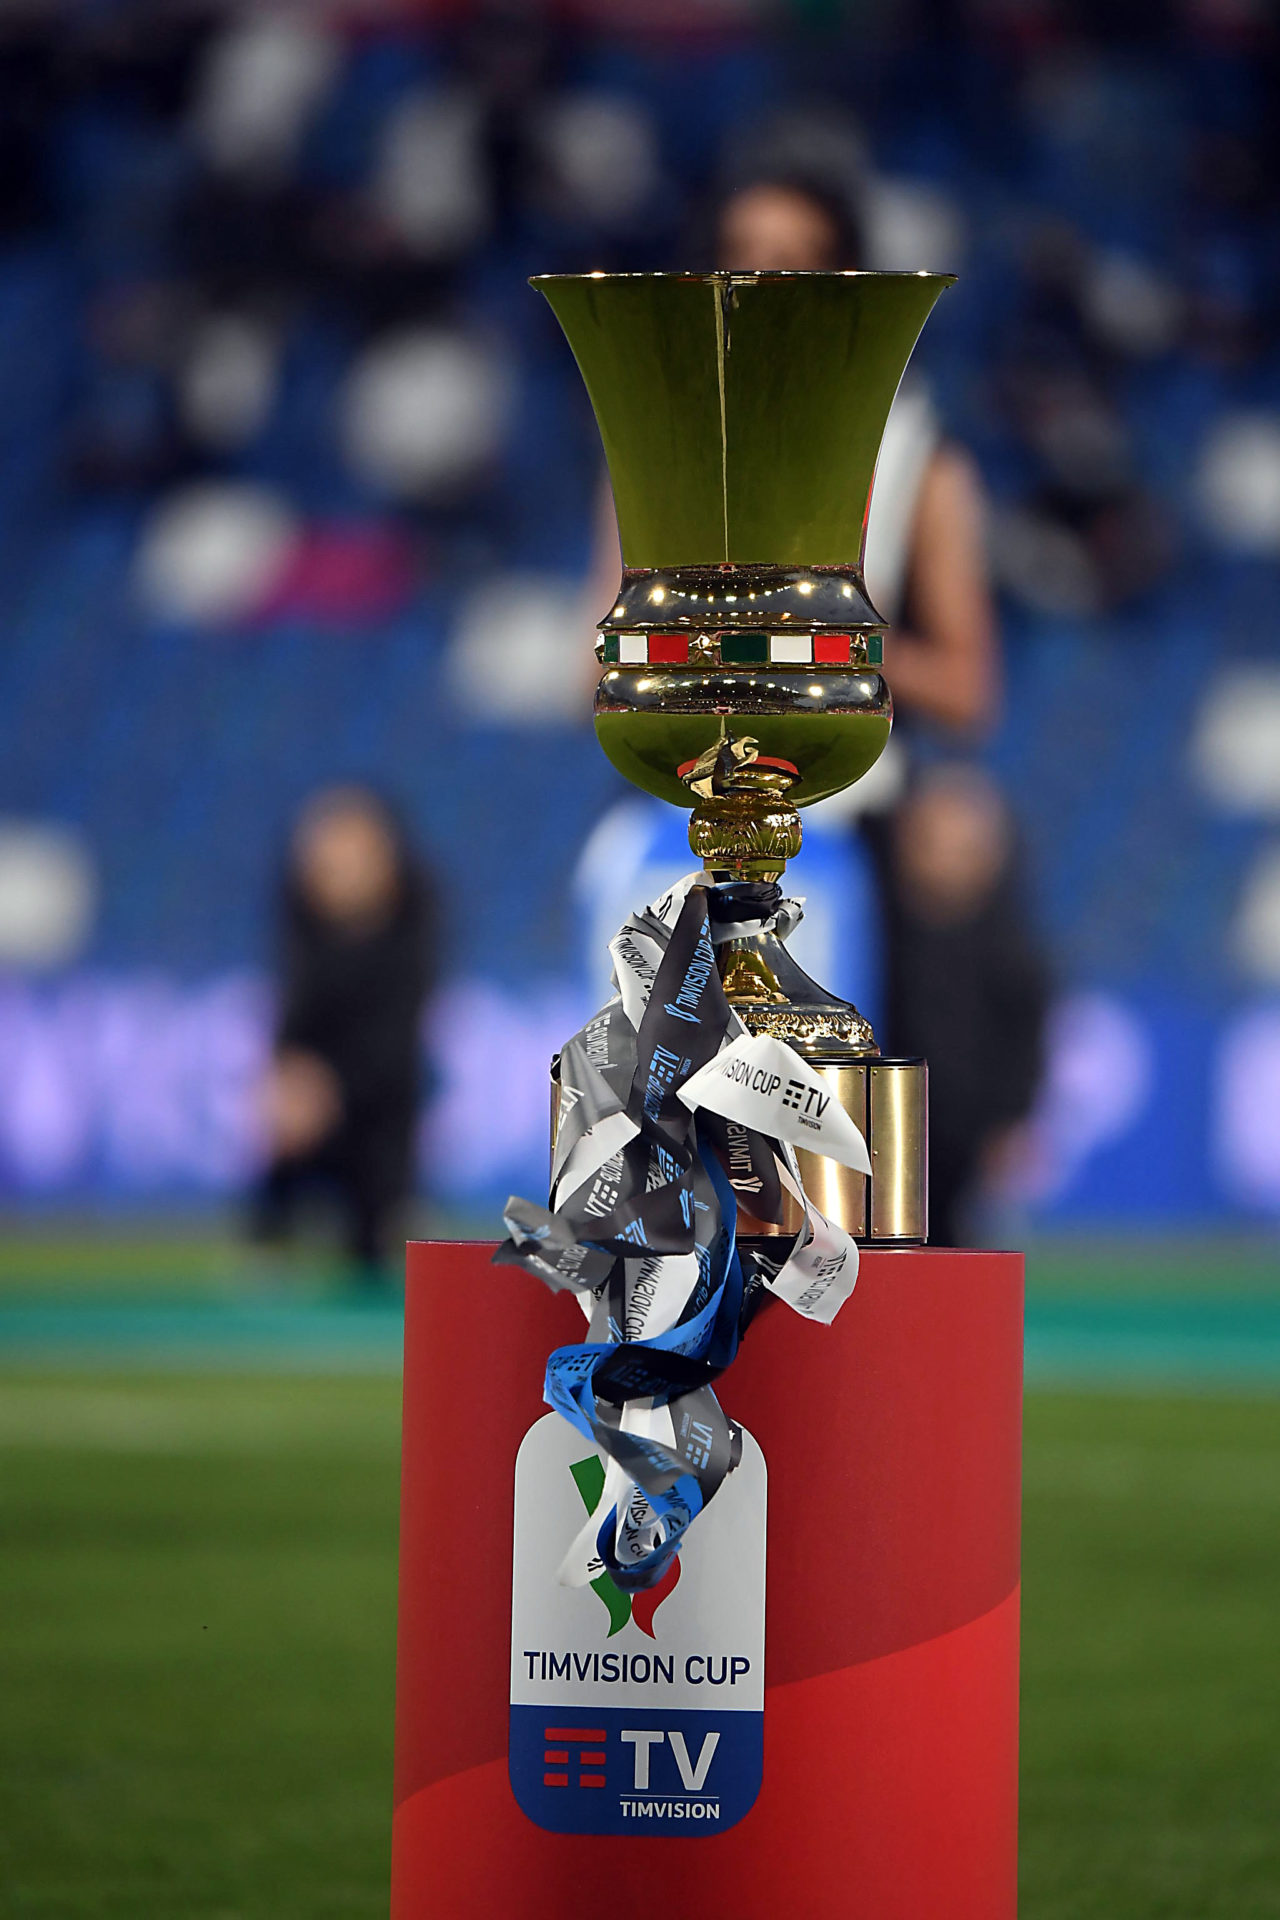 epa09213873 The Coppa Italia Trophy is on display during the Italian Cup final soccer match between Atalanta BC and Juventus FC at Mapei Stadium in Reggio Emilia, Italy, 19 May 2021. EPA-EFE/PAOLO MAGNI